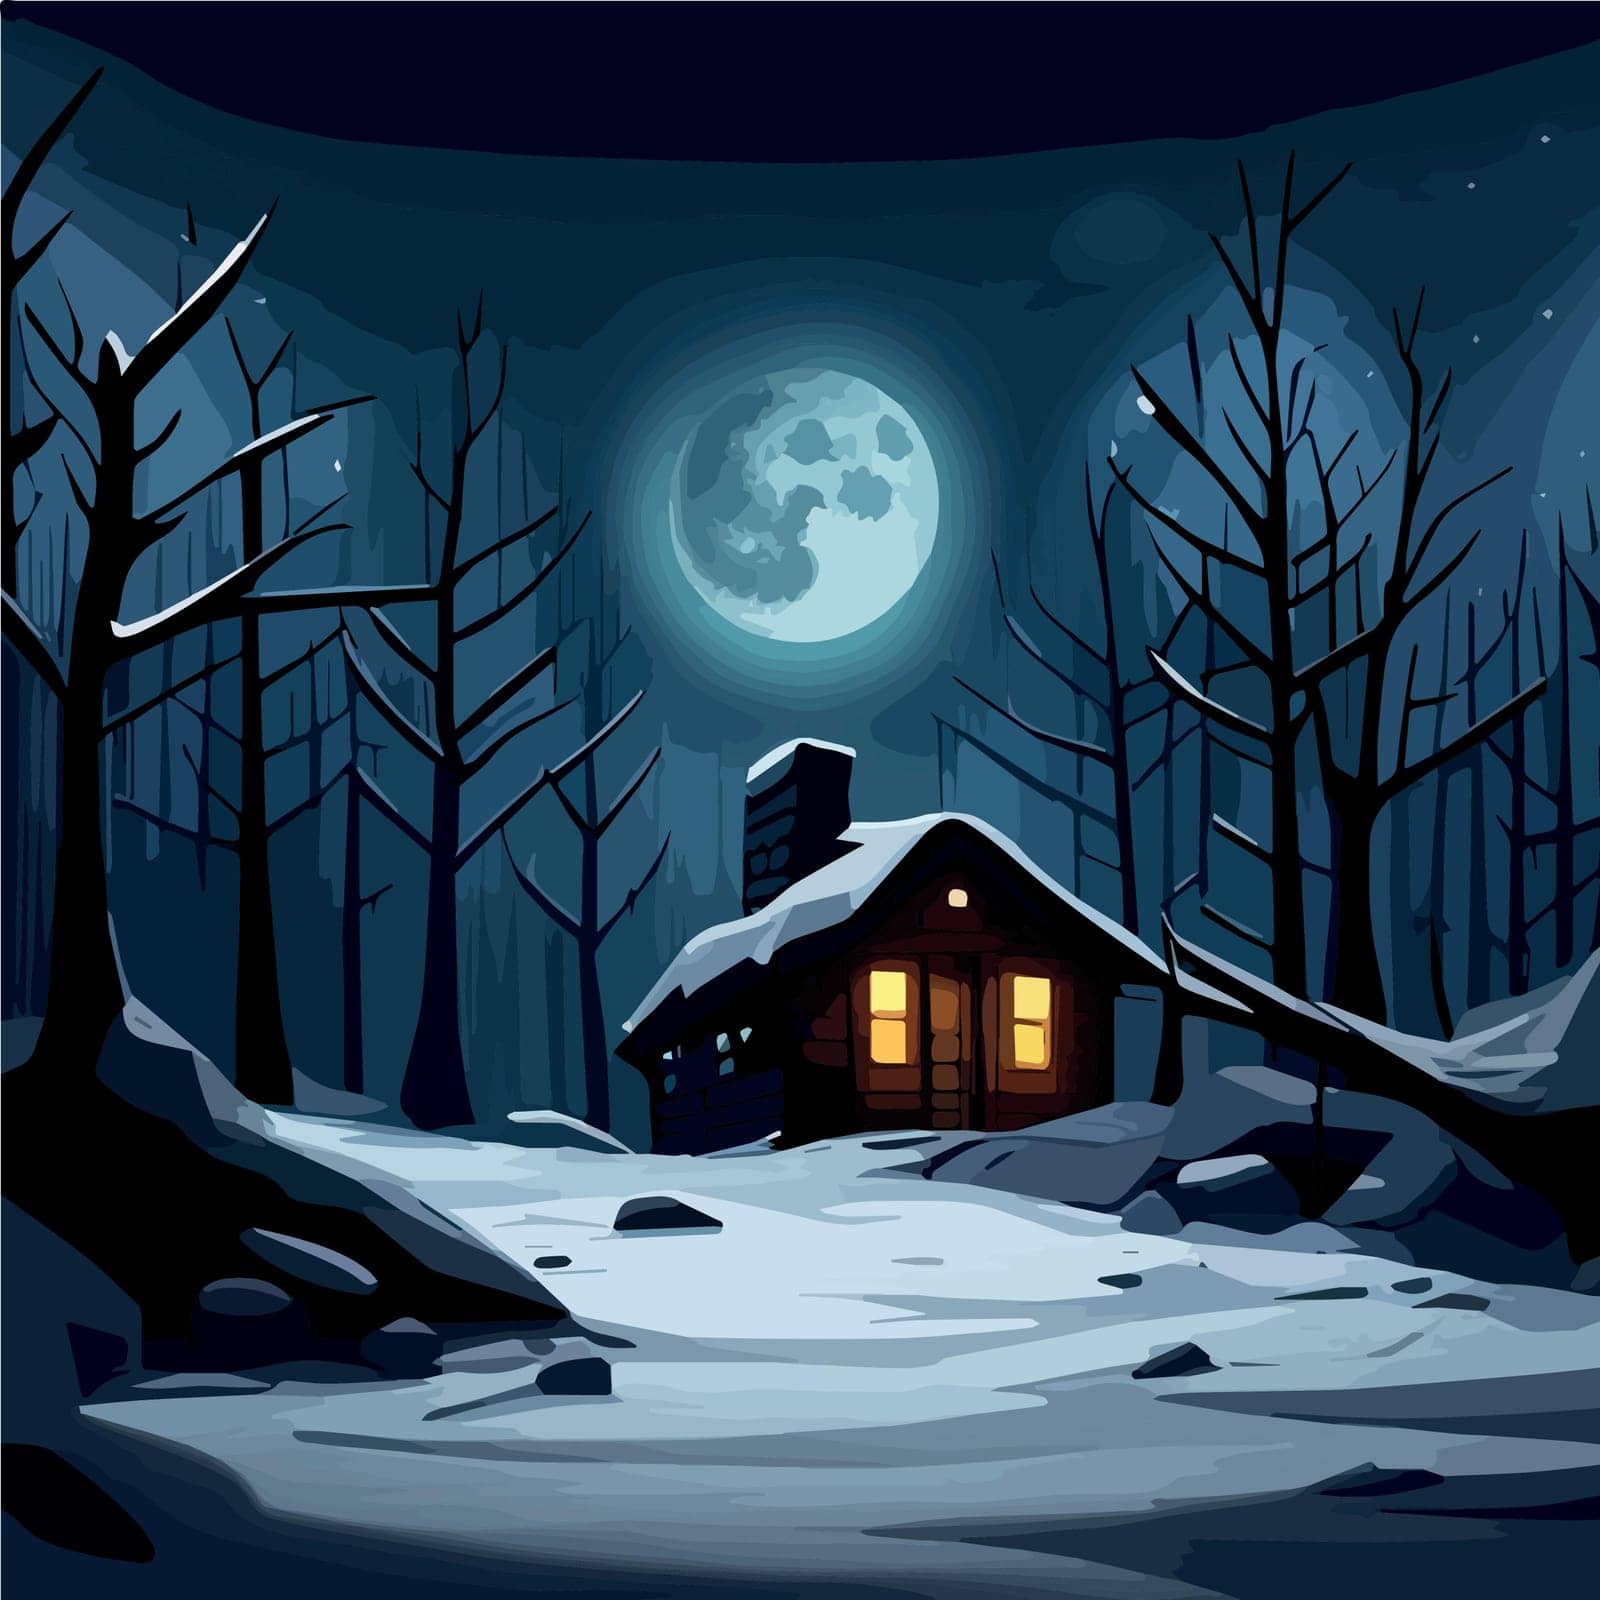 Landscape with moon moonlit night dark mysterious black forest and a home cottage house in winter, vector illustration